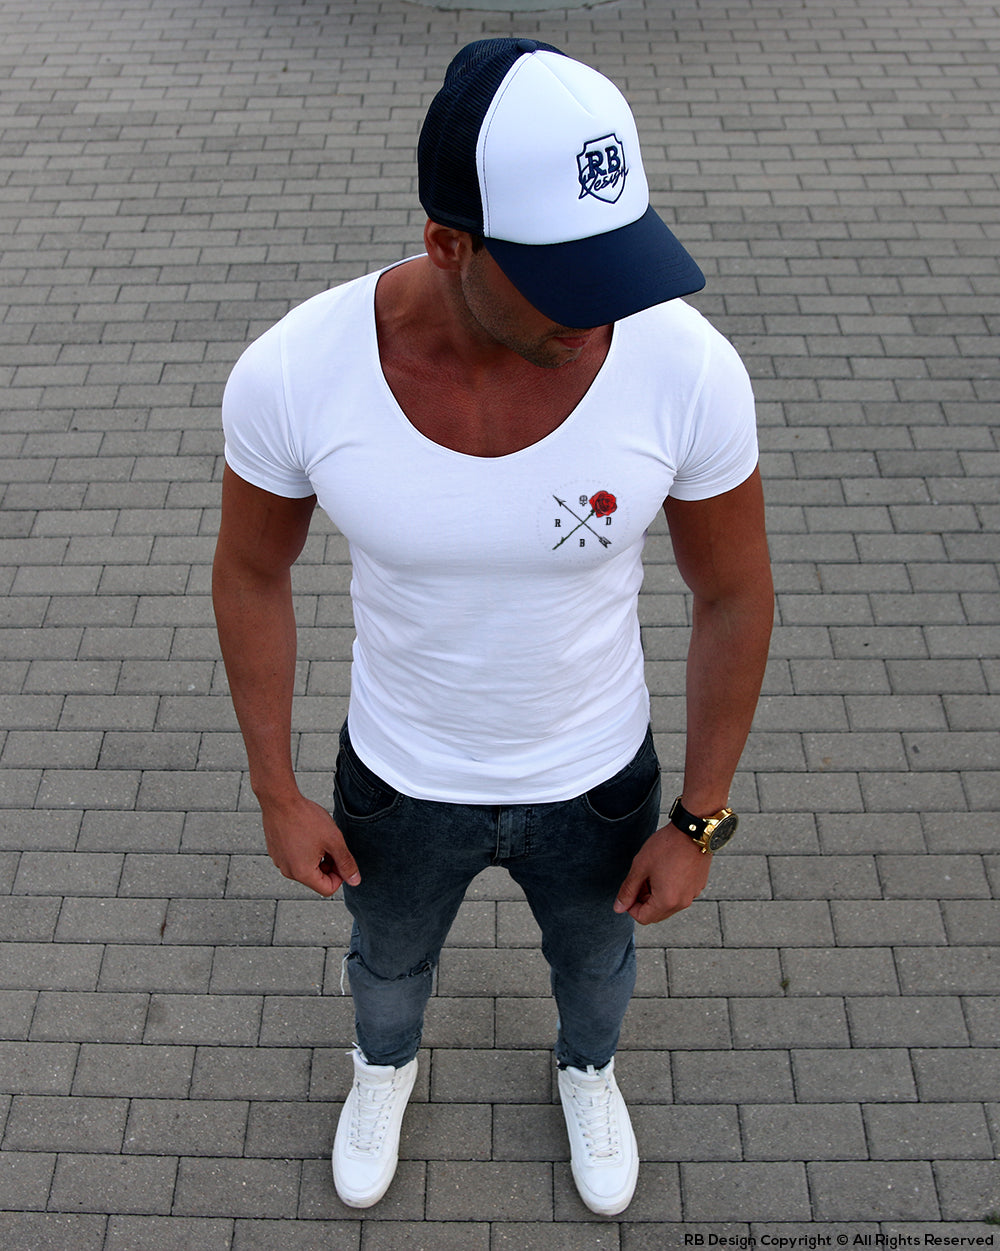 Men's White T-shirt Arrow and Rose Pocket Style MD894